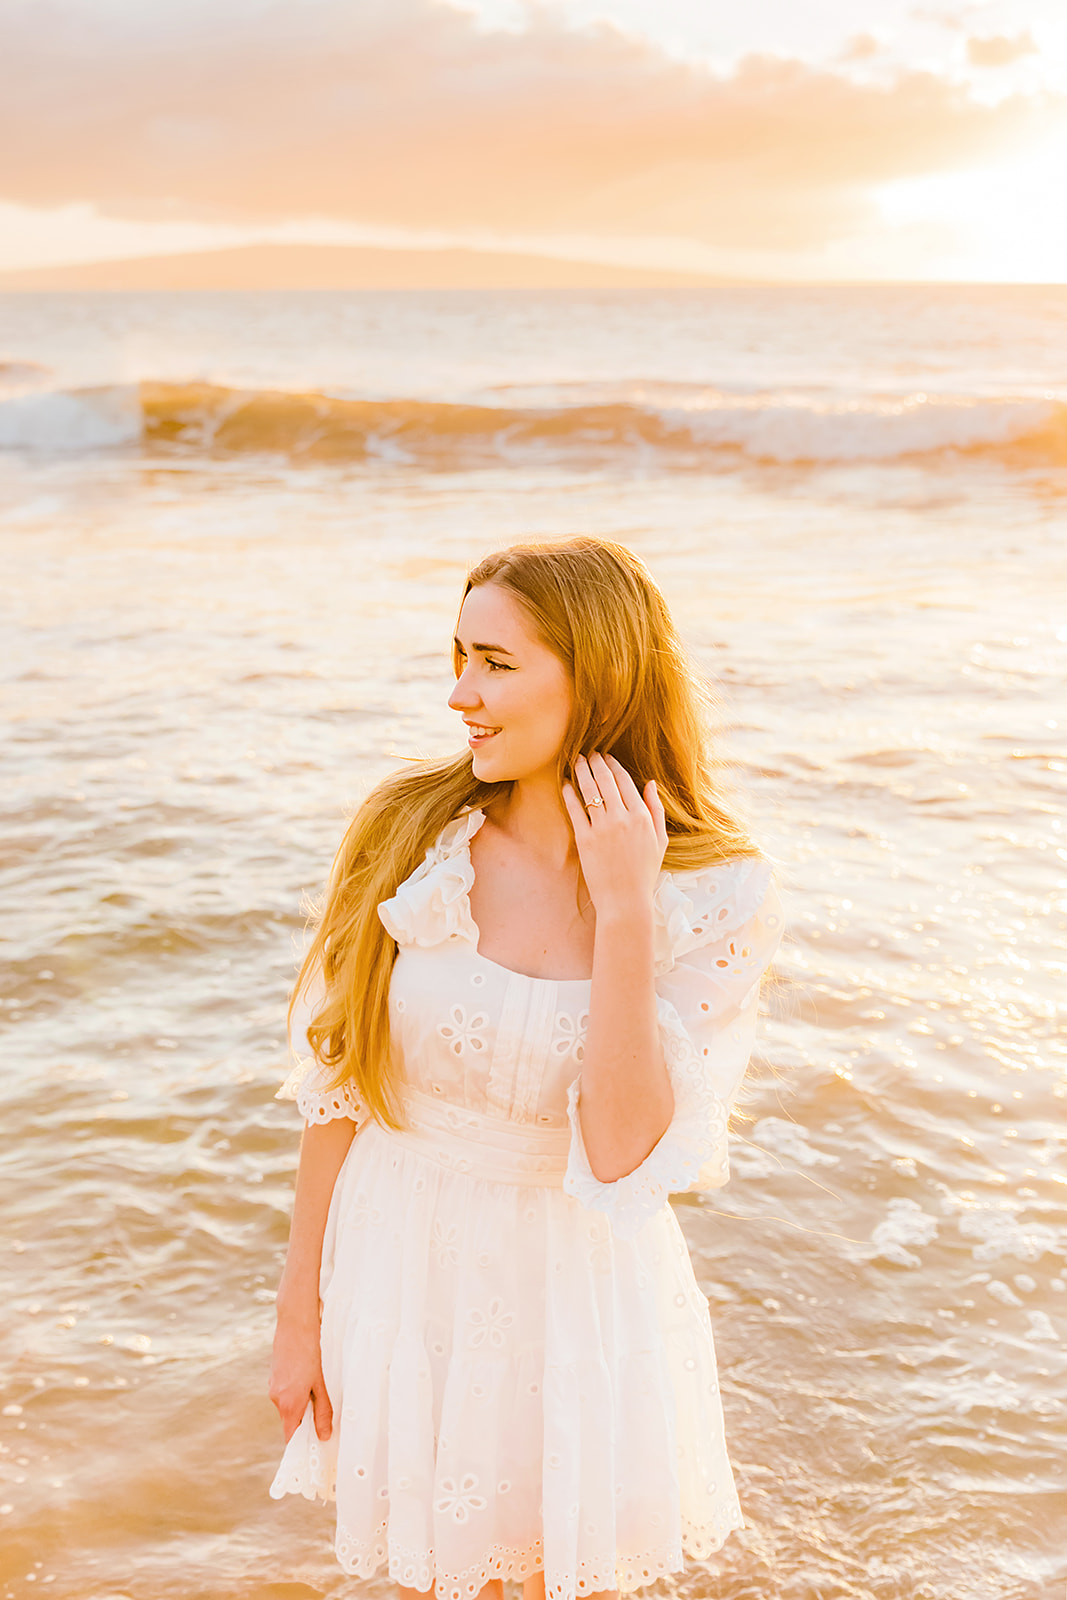 YouTube influencer Mia Maples wearing her engagement ring and an adorable white dress poses for sunset engagement photos on the beach in Maui.